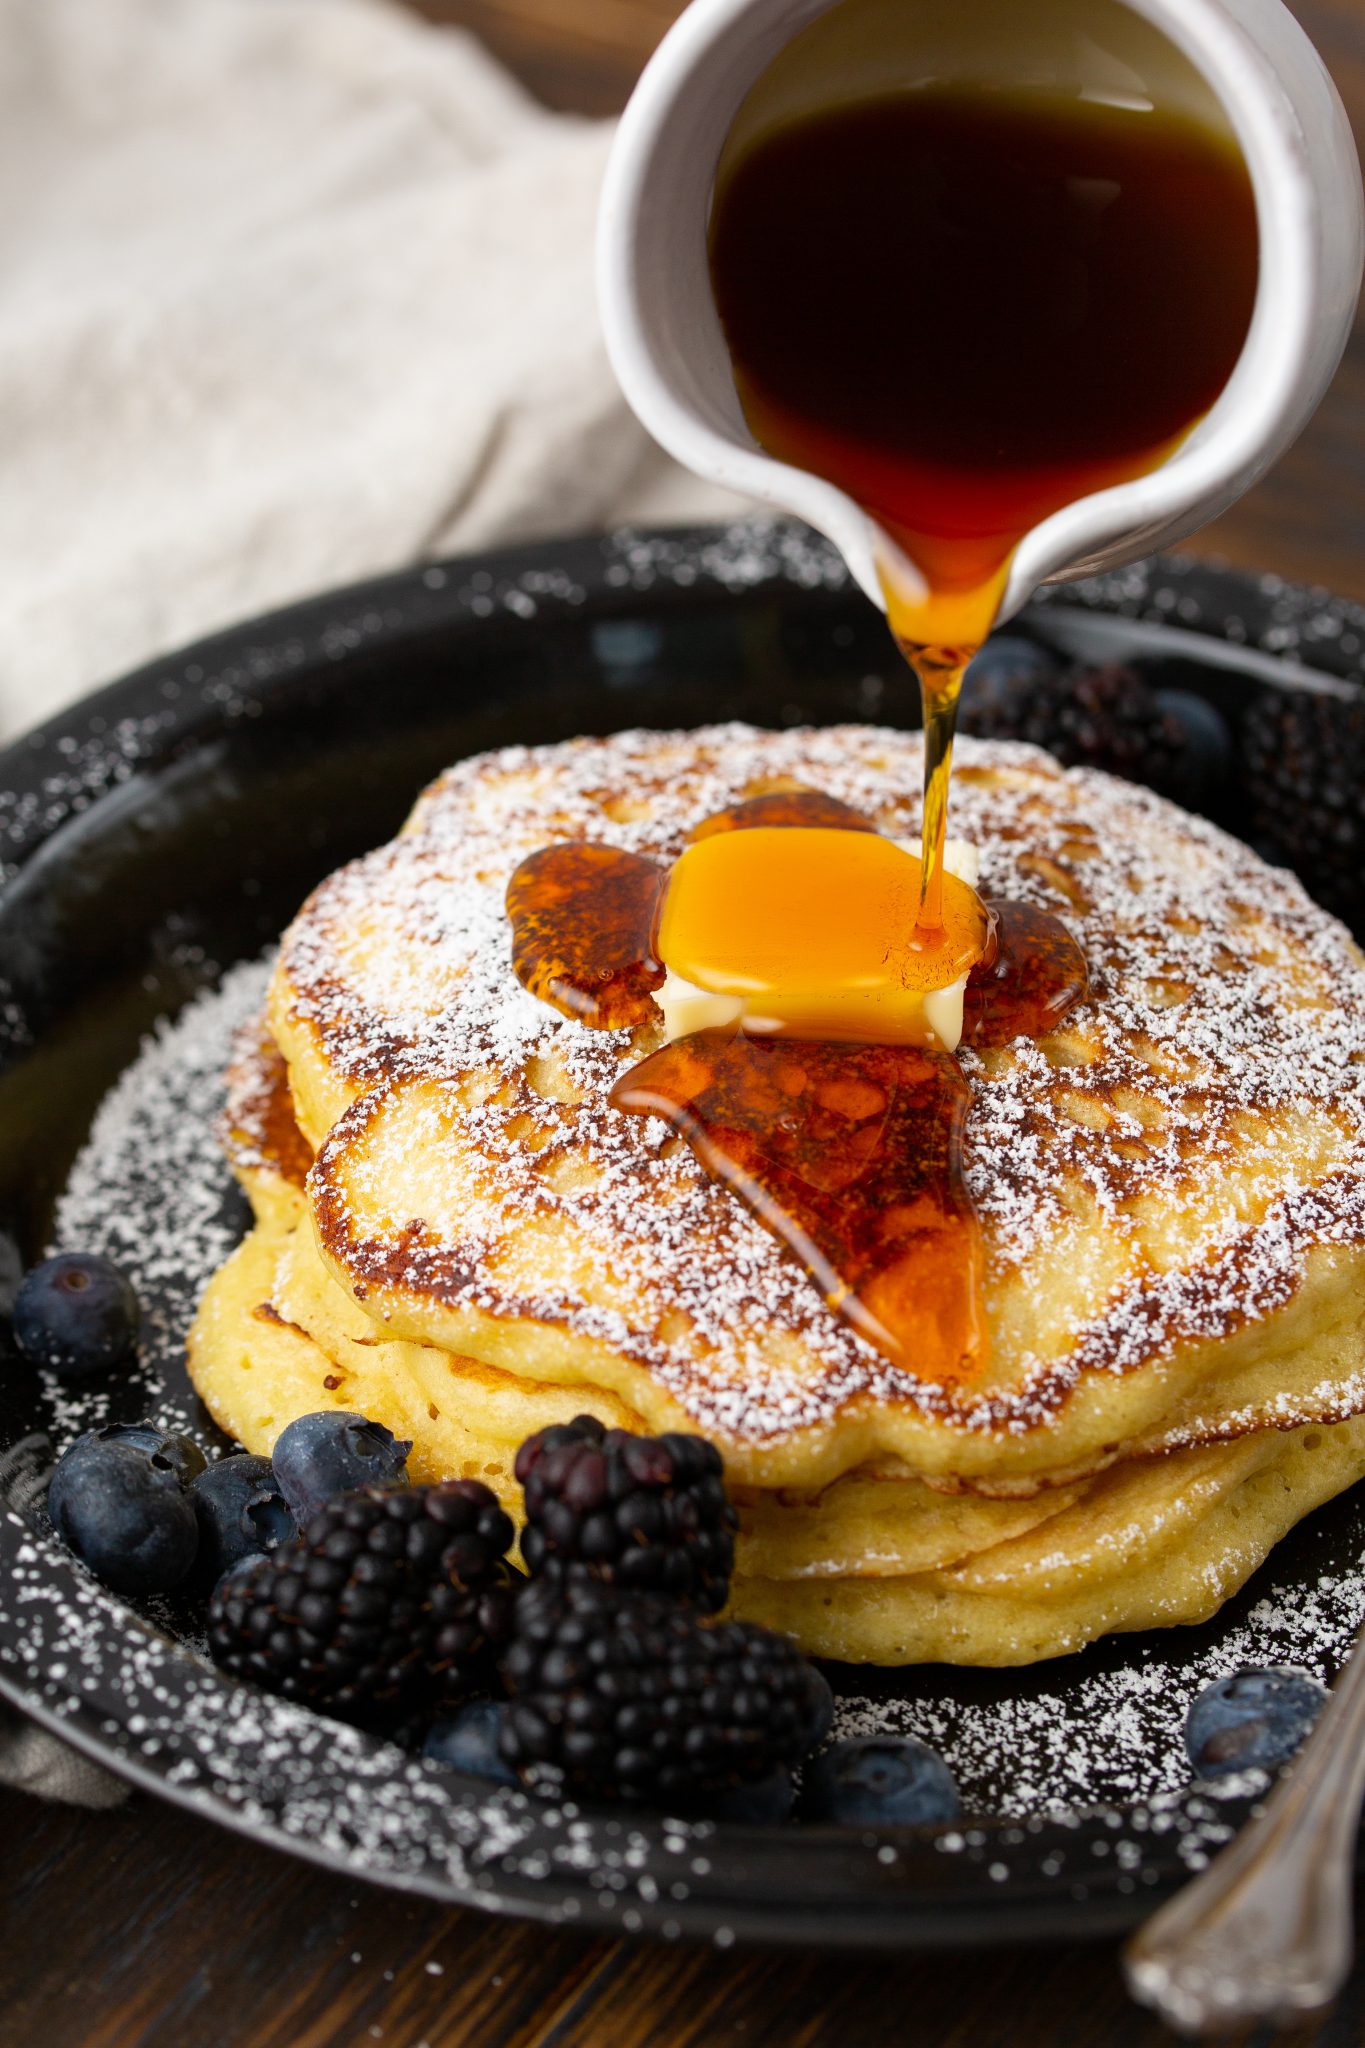 warm maple syrup poured over fresh buttermilk pancakes